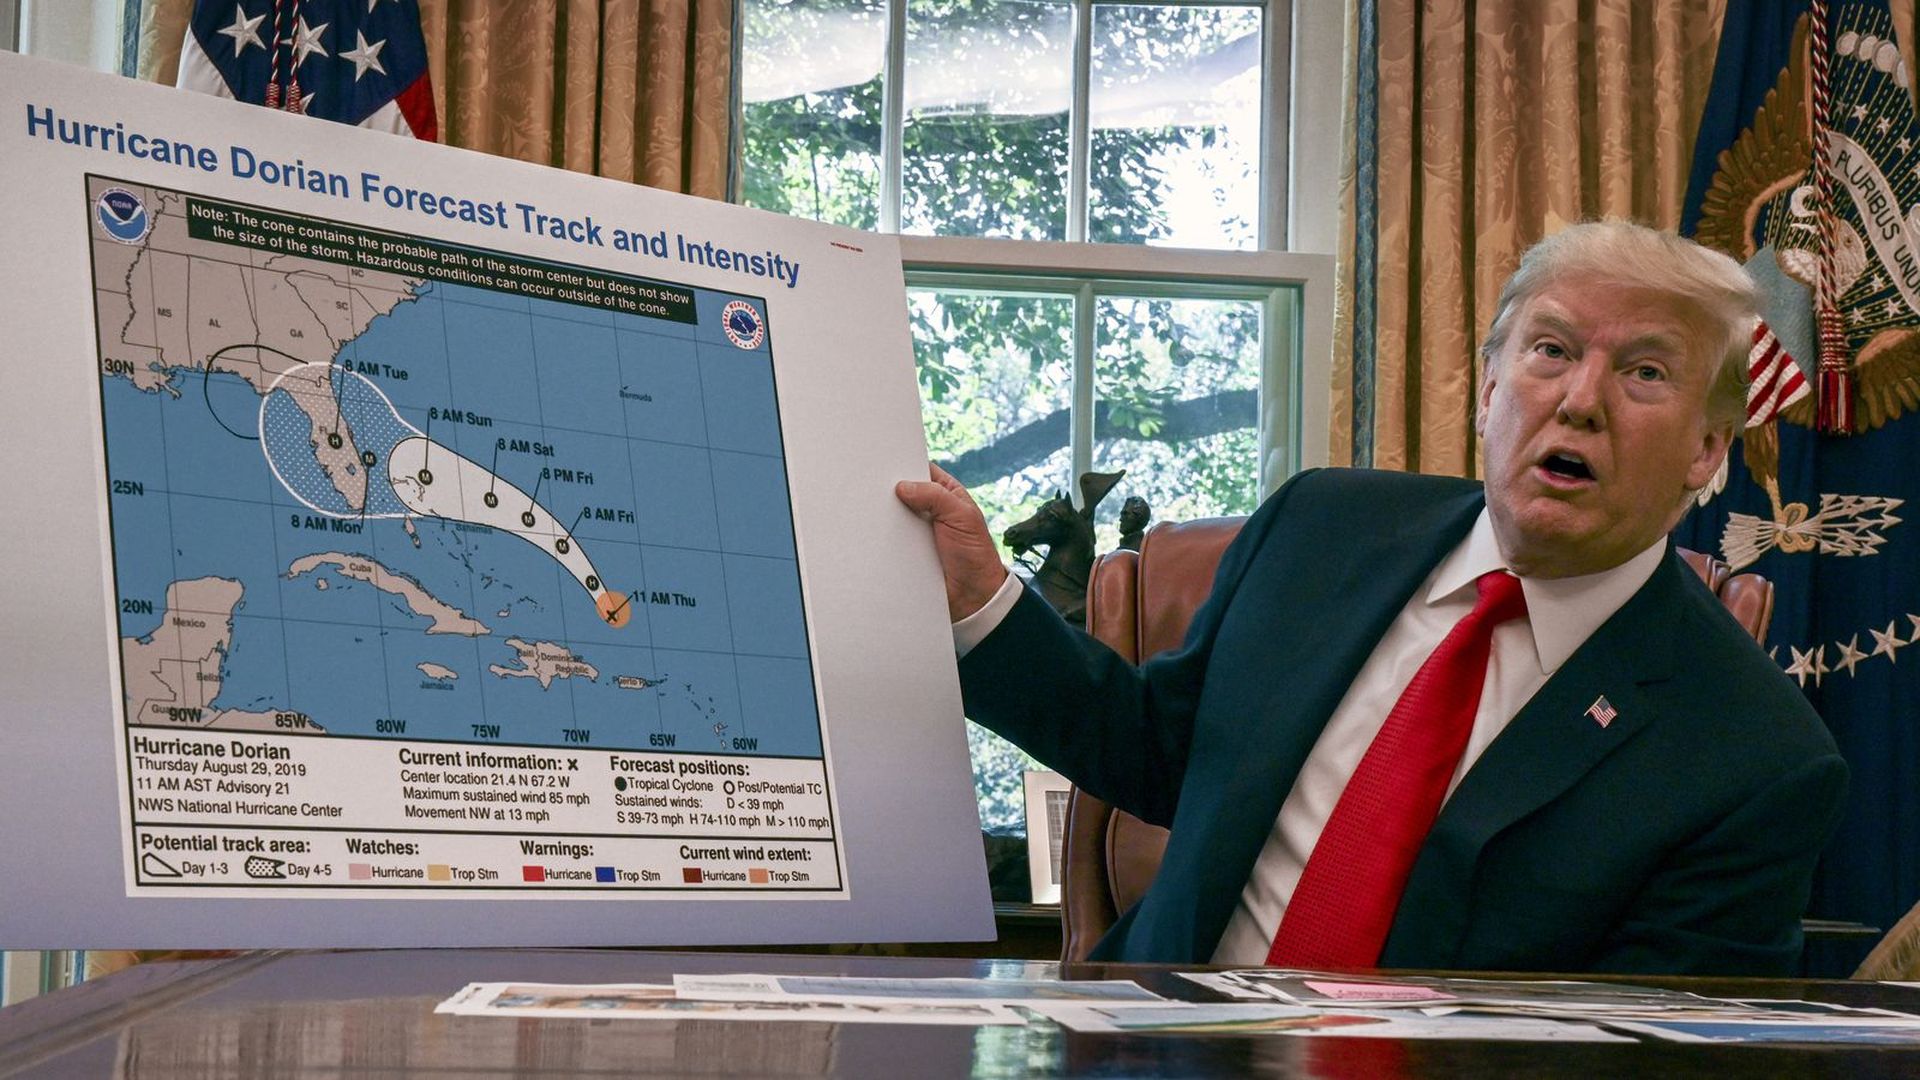 Trump gives an Oval Office briefing on the status of Hurricane Dorian on Sept. 4.